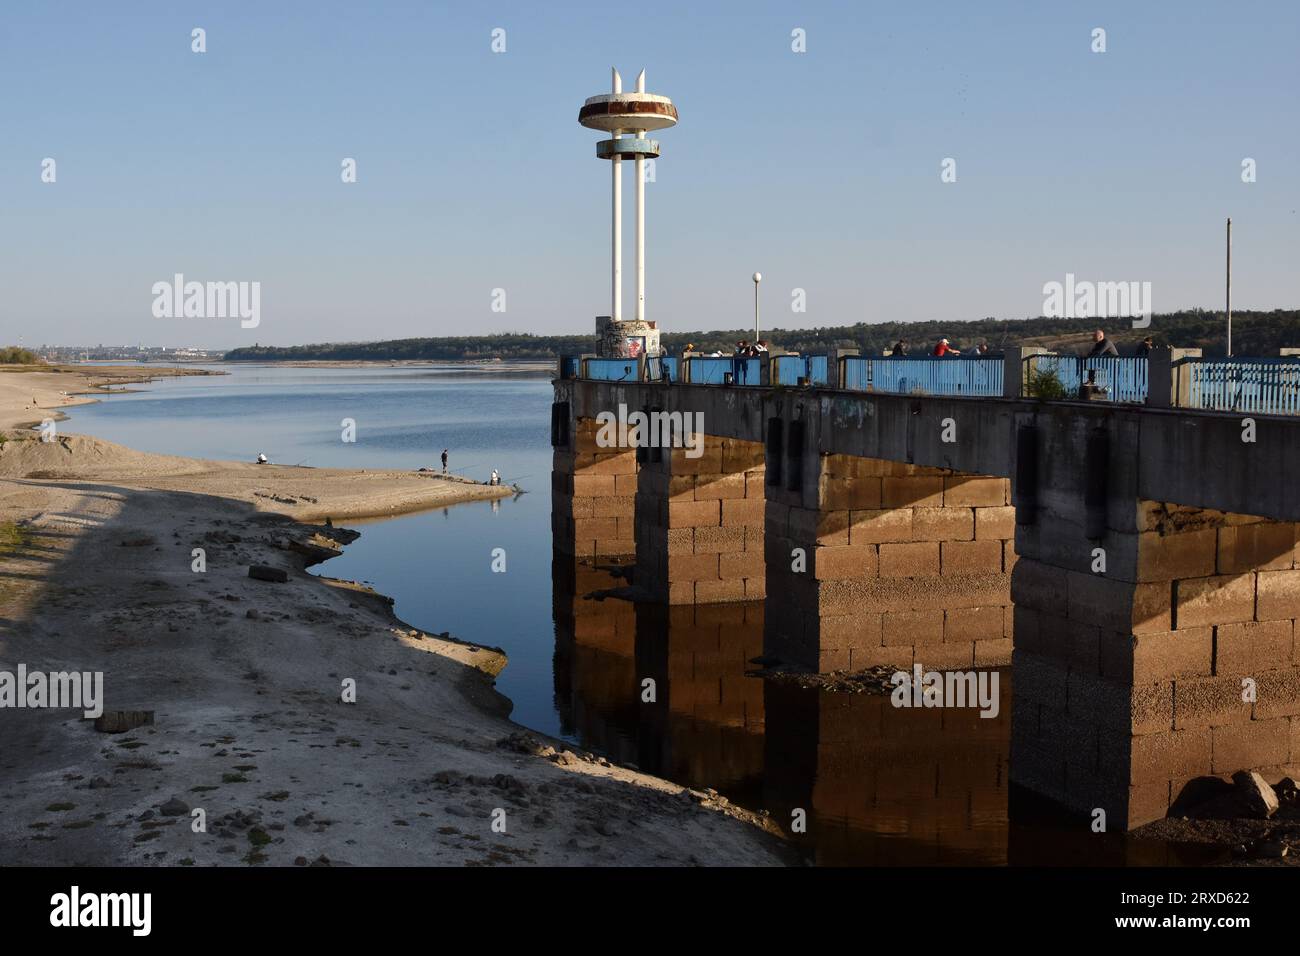 Local residents are seeing on a central pier as water in Dnipro river dropped more than 4 meters after the explosion of the Kakhovka dam in Zaporizhzhia. The commander of the Tavria group troops, Oleksandr Tarnavskyi (Ukraine), said that the Defence Forces had broken through the Russian defences in Verbove, Zaporizhzhia region. He adds that the main thing is not to lose the initiative that the Ukrainian army has now. Stock Photo